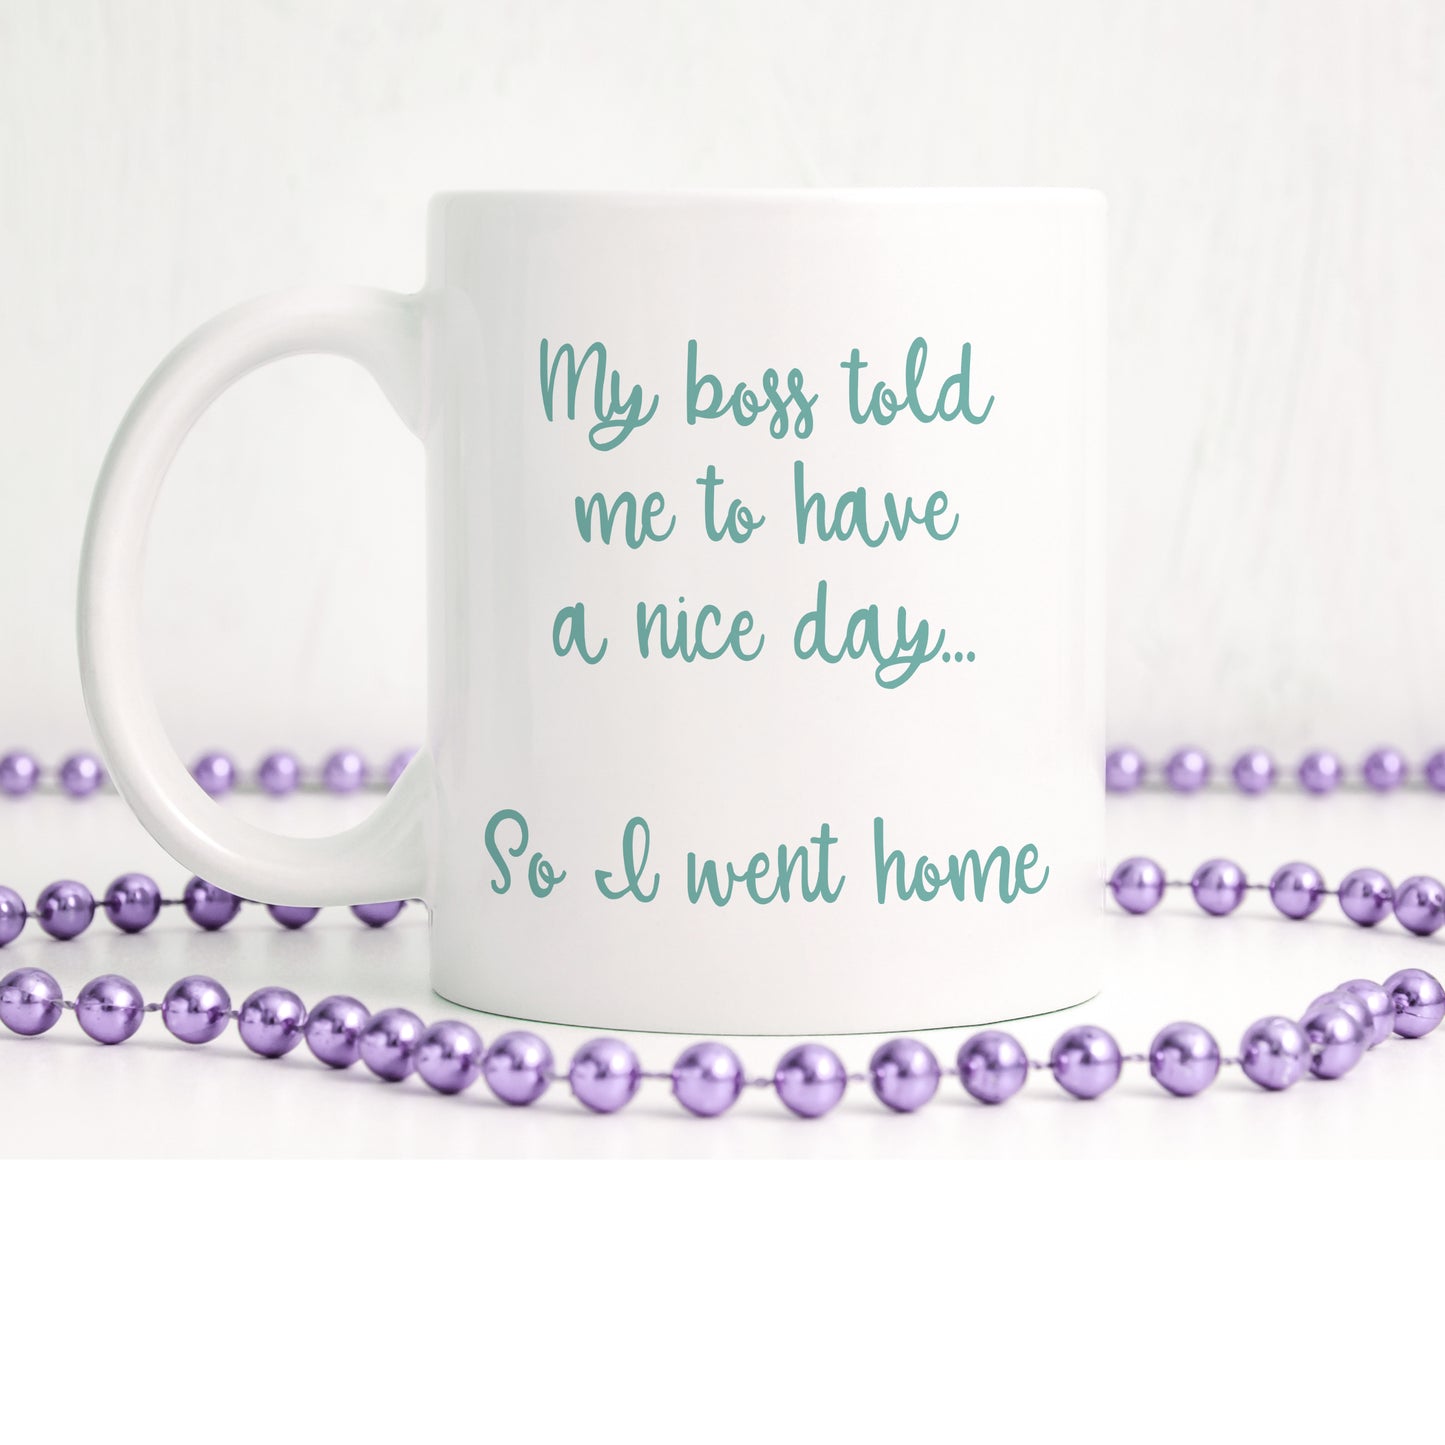 My boss told me to have a nice day, so I went home | Ceramic mug - Adnil Creations